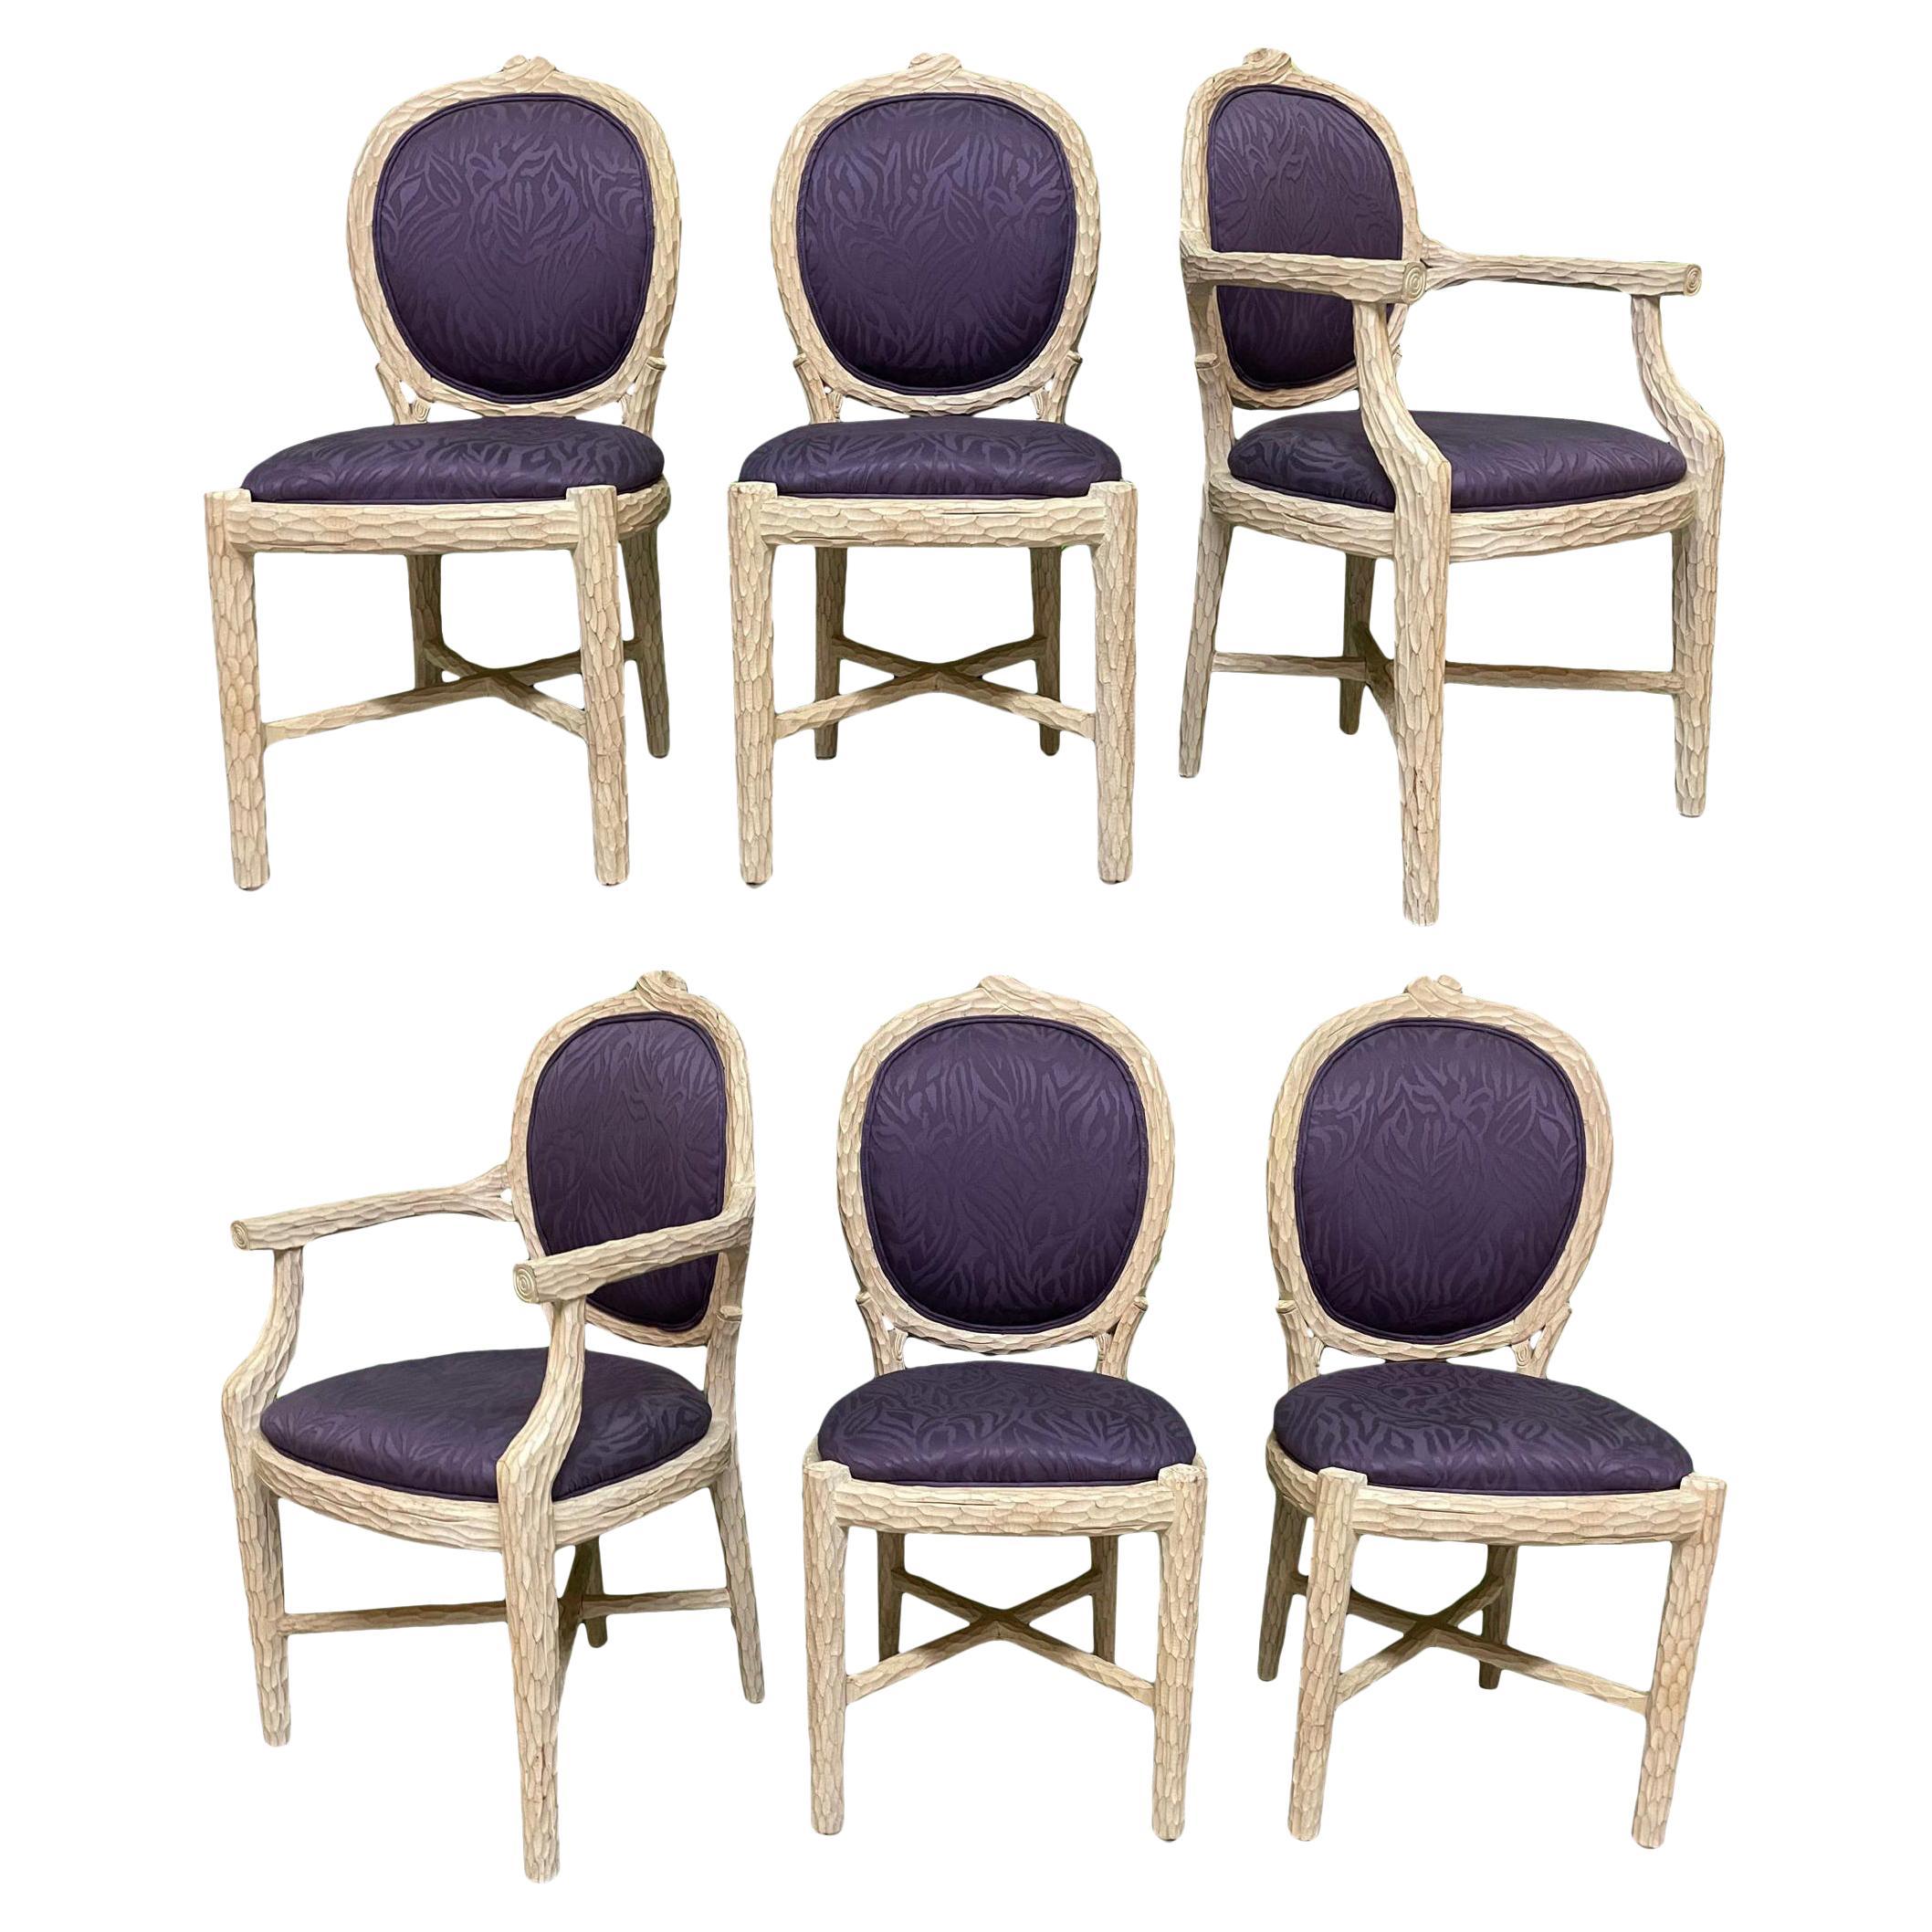 Faux Bois Trompe-l'Oeil, Carved Twig Dining Chairs, Set of 6